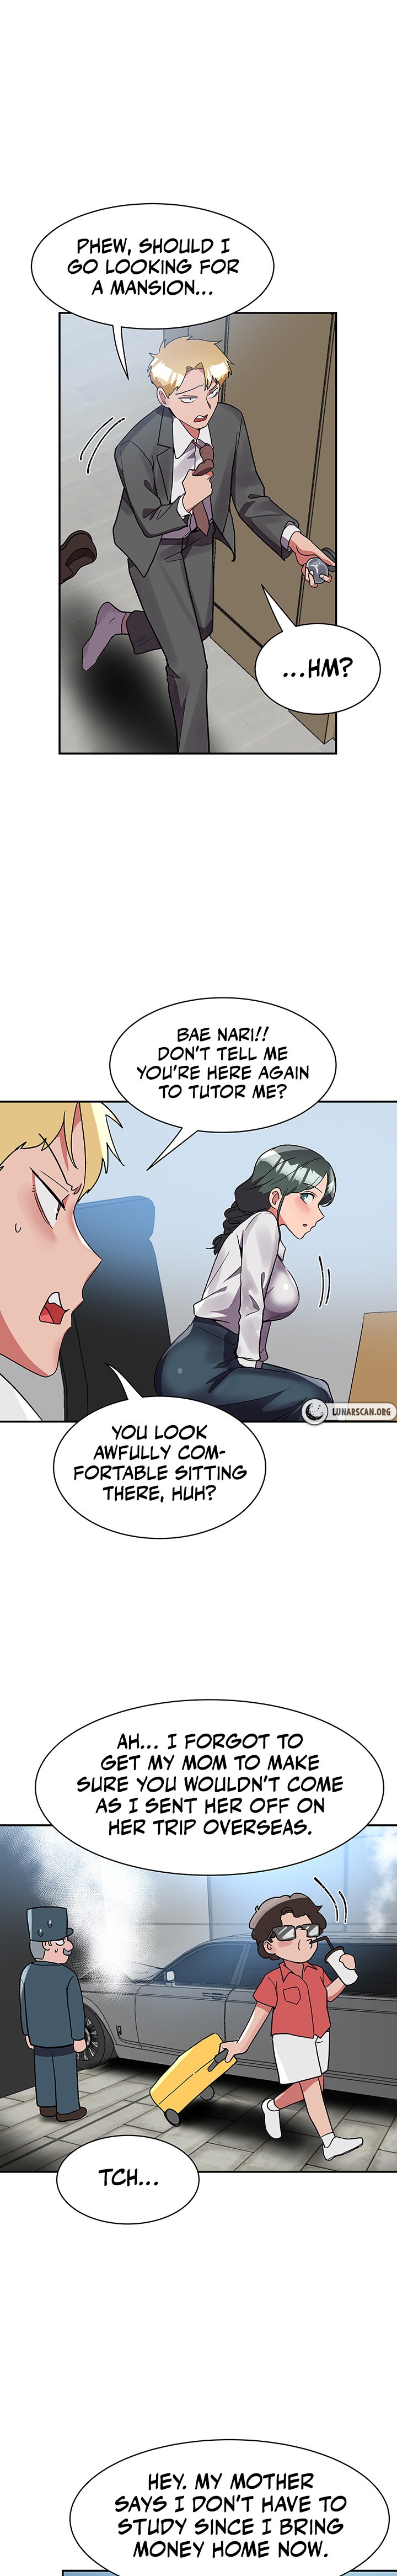 Relationship Reverse Button: Let’s Educate That Arrogant Girl - Chapter 1 Page 19